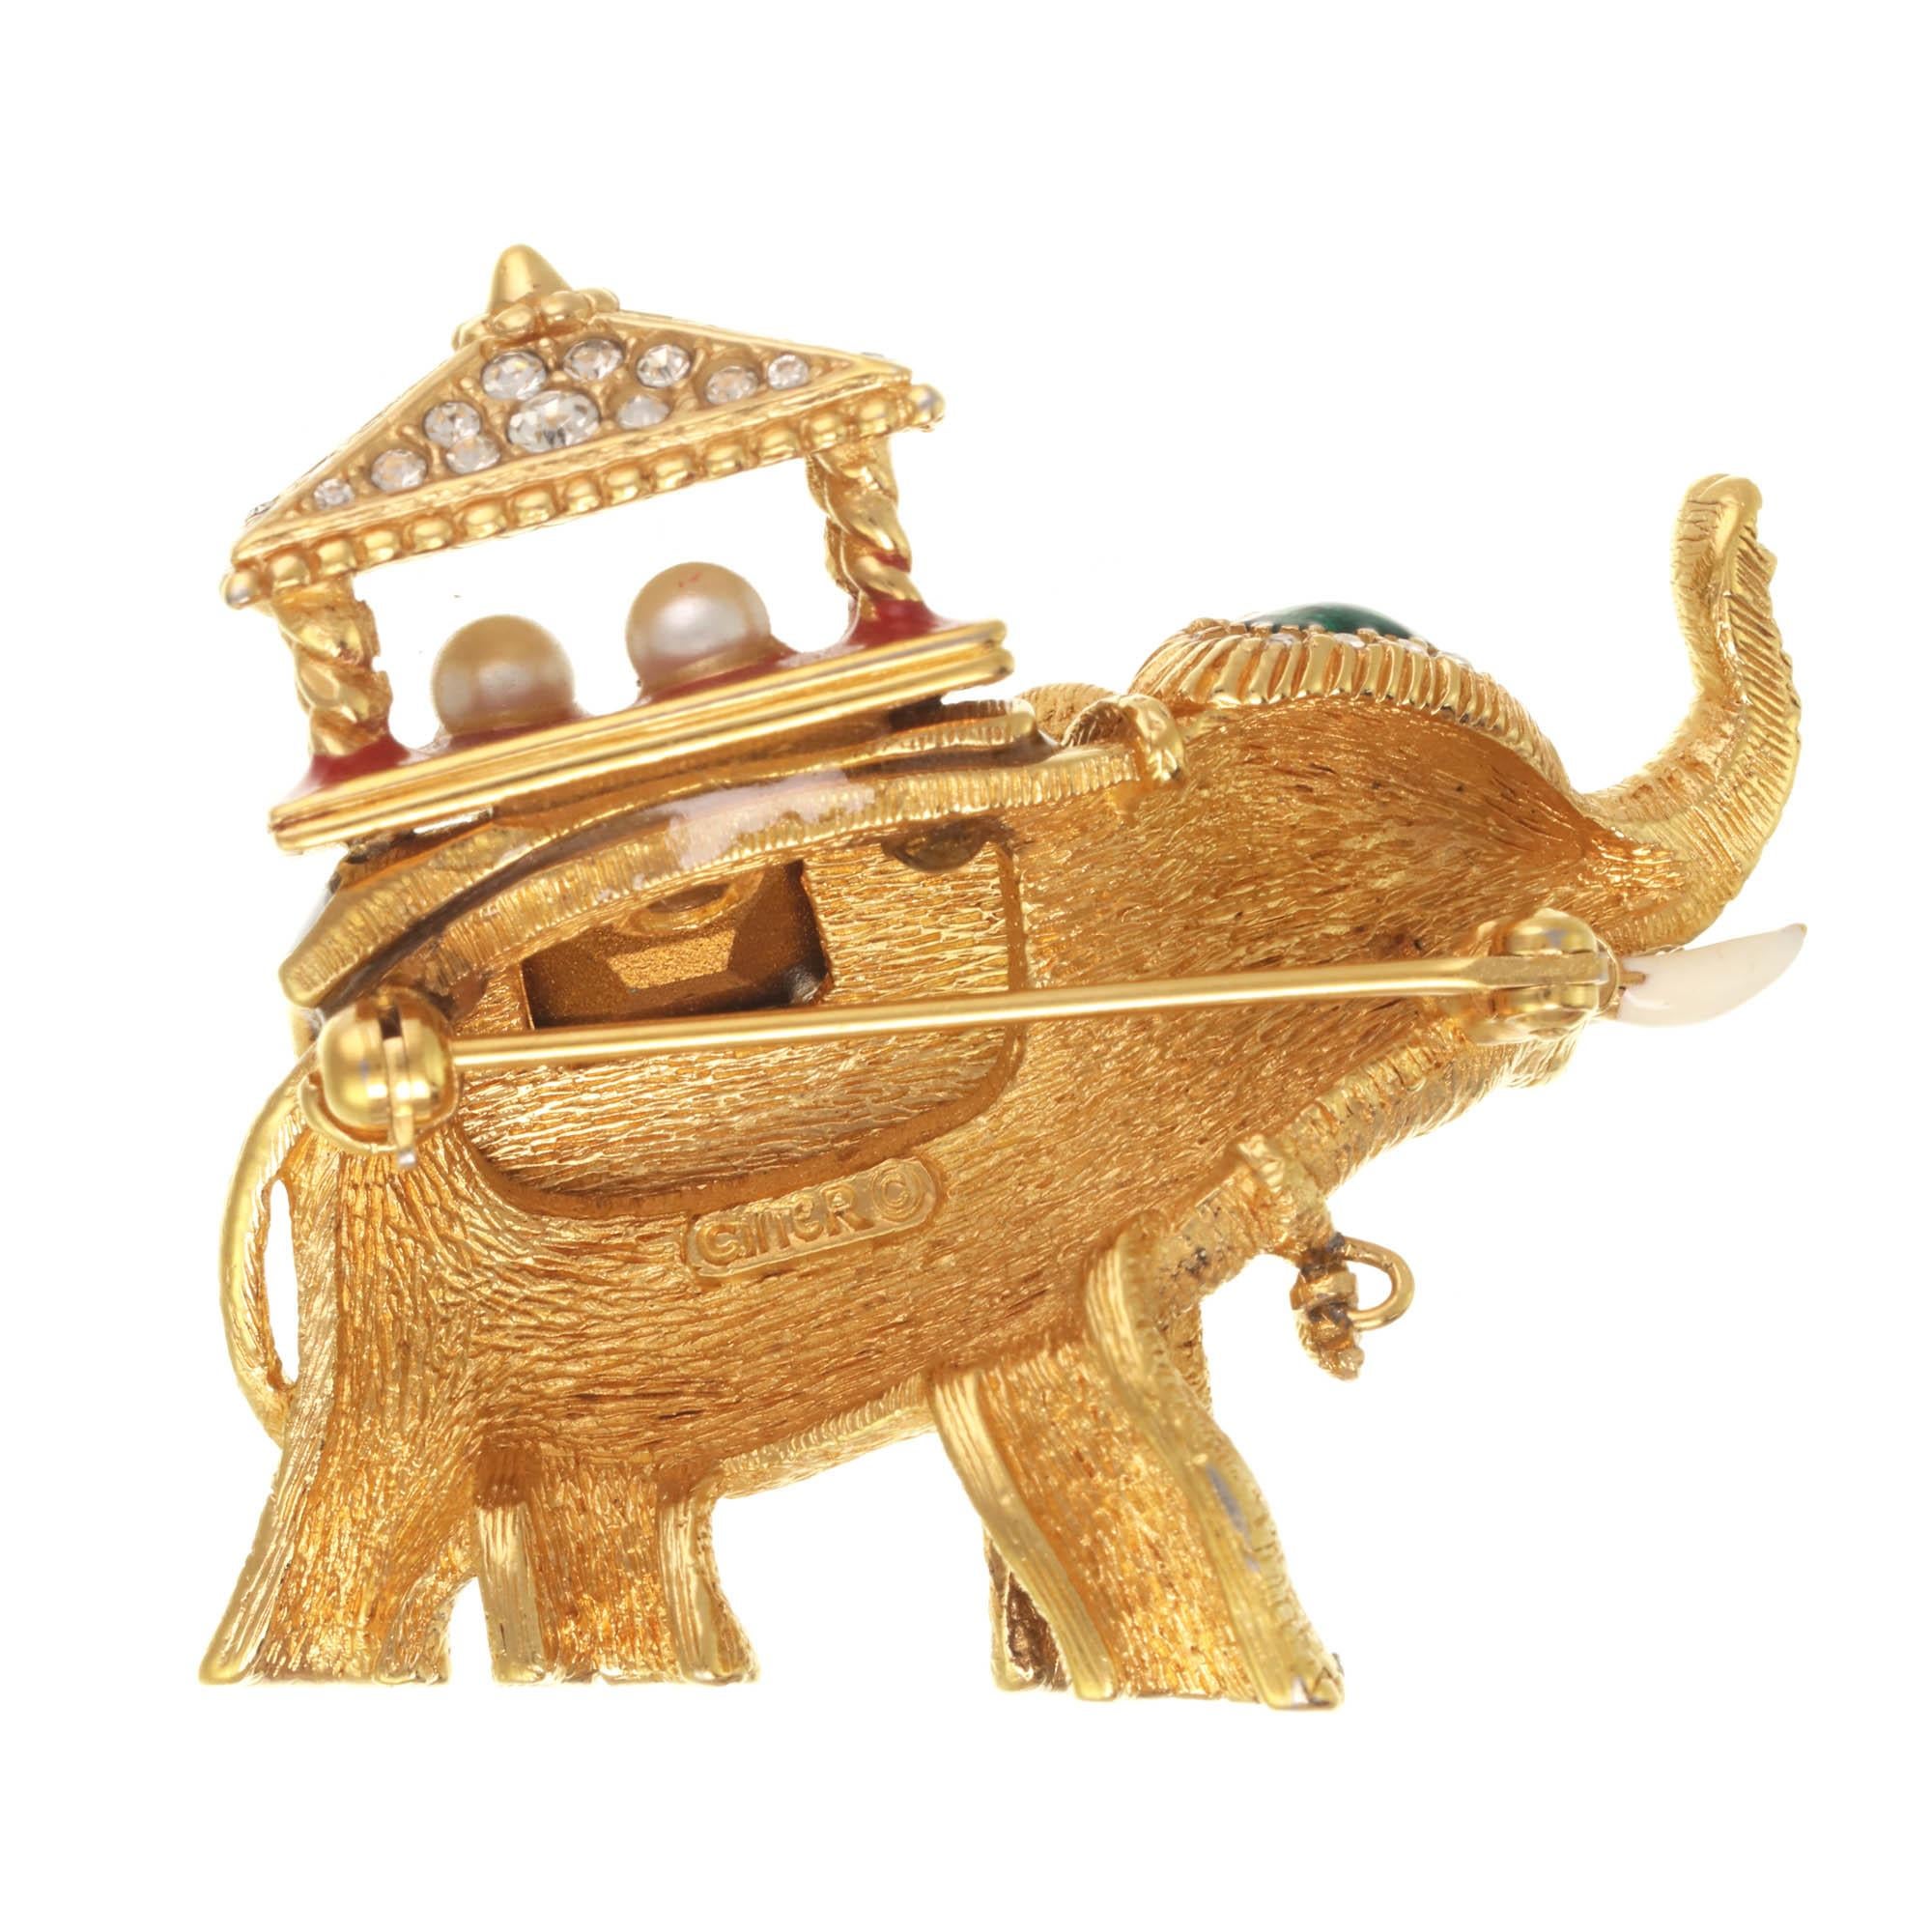 Trunks up! This gorgeous lucky elephant pin features a gorgeous pagoda with a royal blue blanket, encrusted with crystal rhinestones and a faceted emerald rhinestone. A truly gorgeous collectible piece, this pin has vintage appeal.

PLEASE NOTE: The